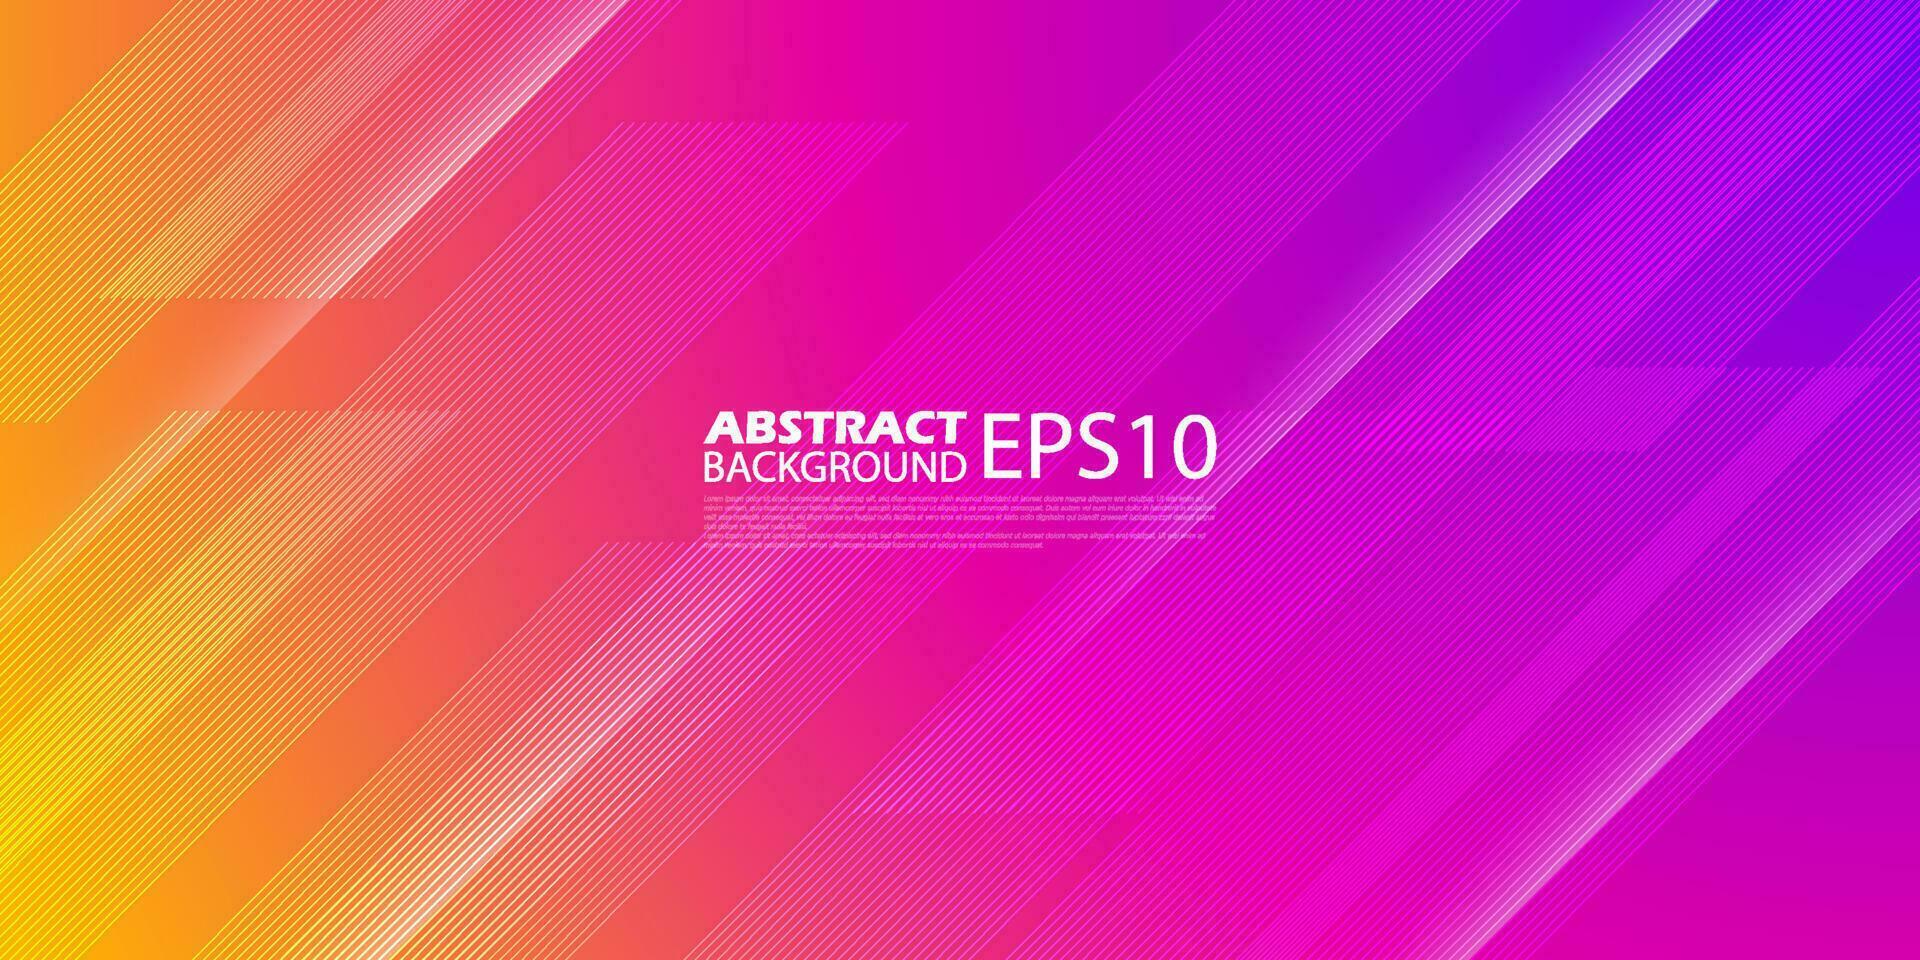 Abstract bright orange,pink and purple gradient background overlap template vector with overlay lines and shapes.Colorful background with simple pattern design.Eps10 vector